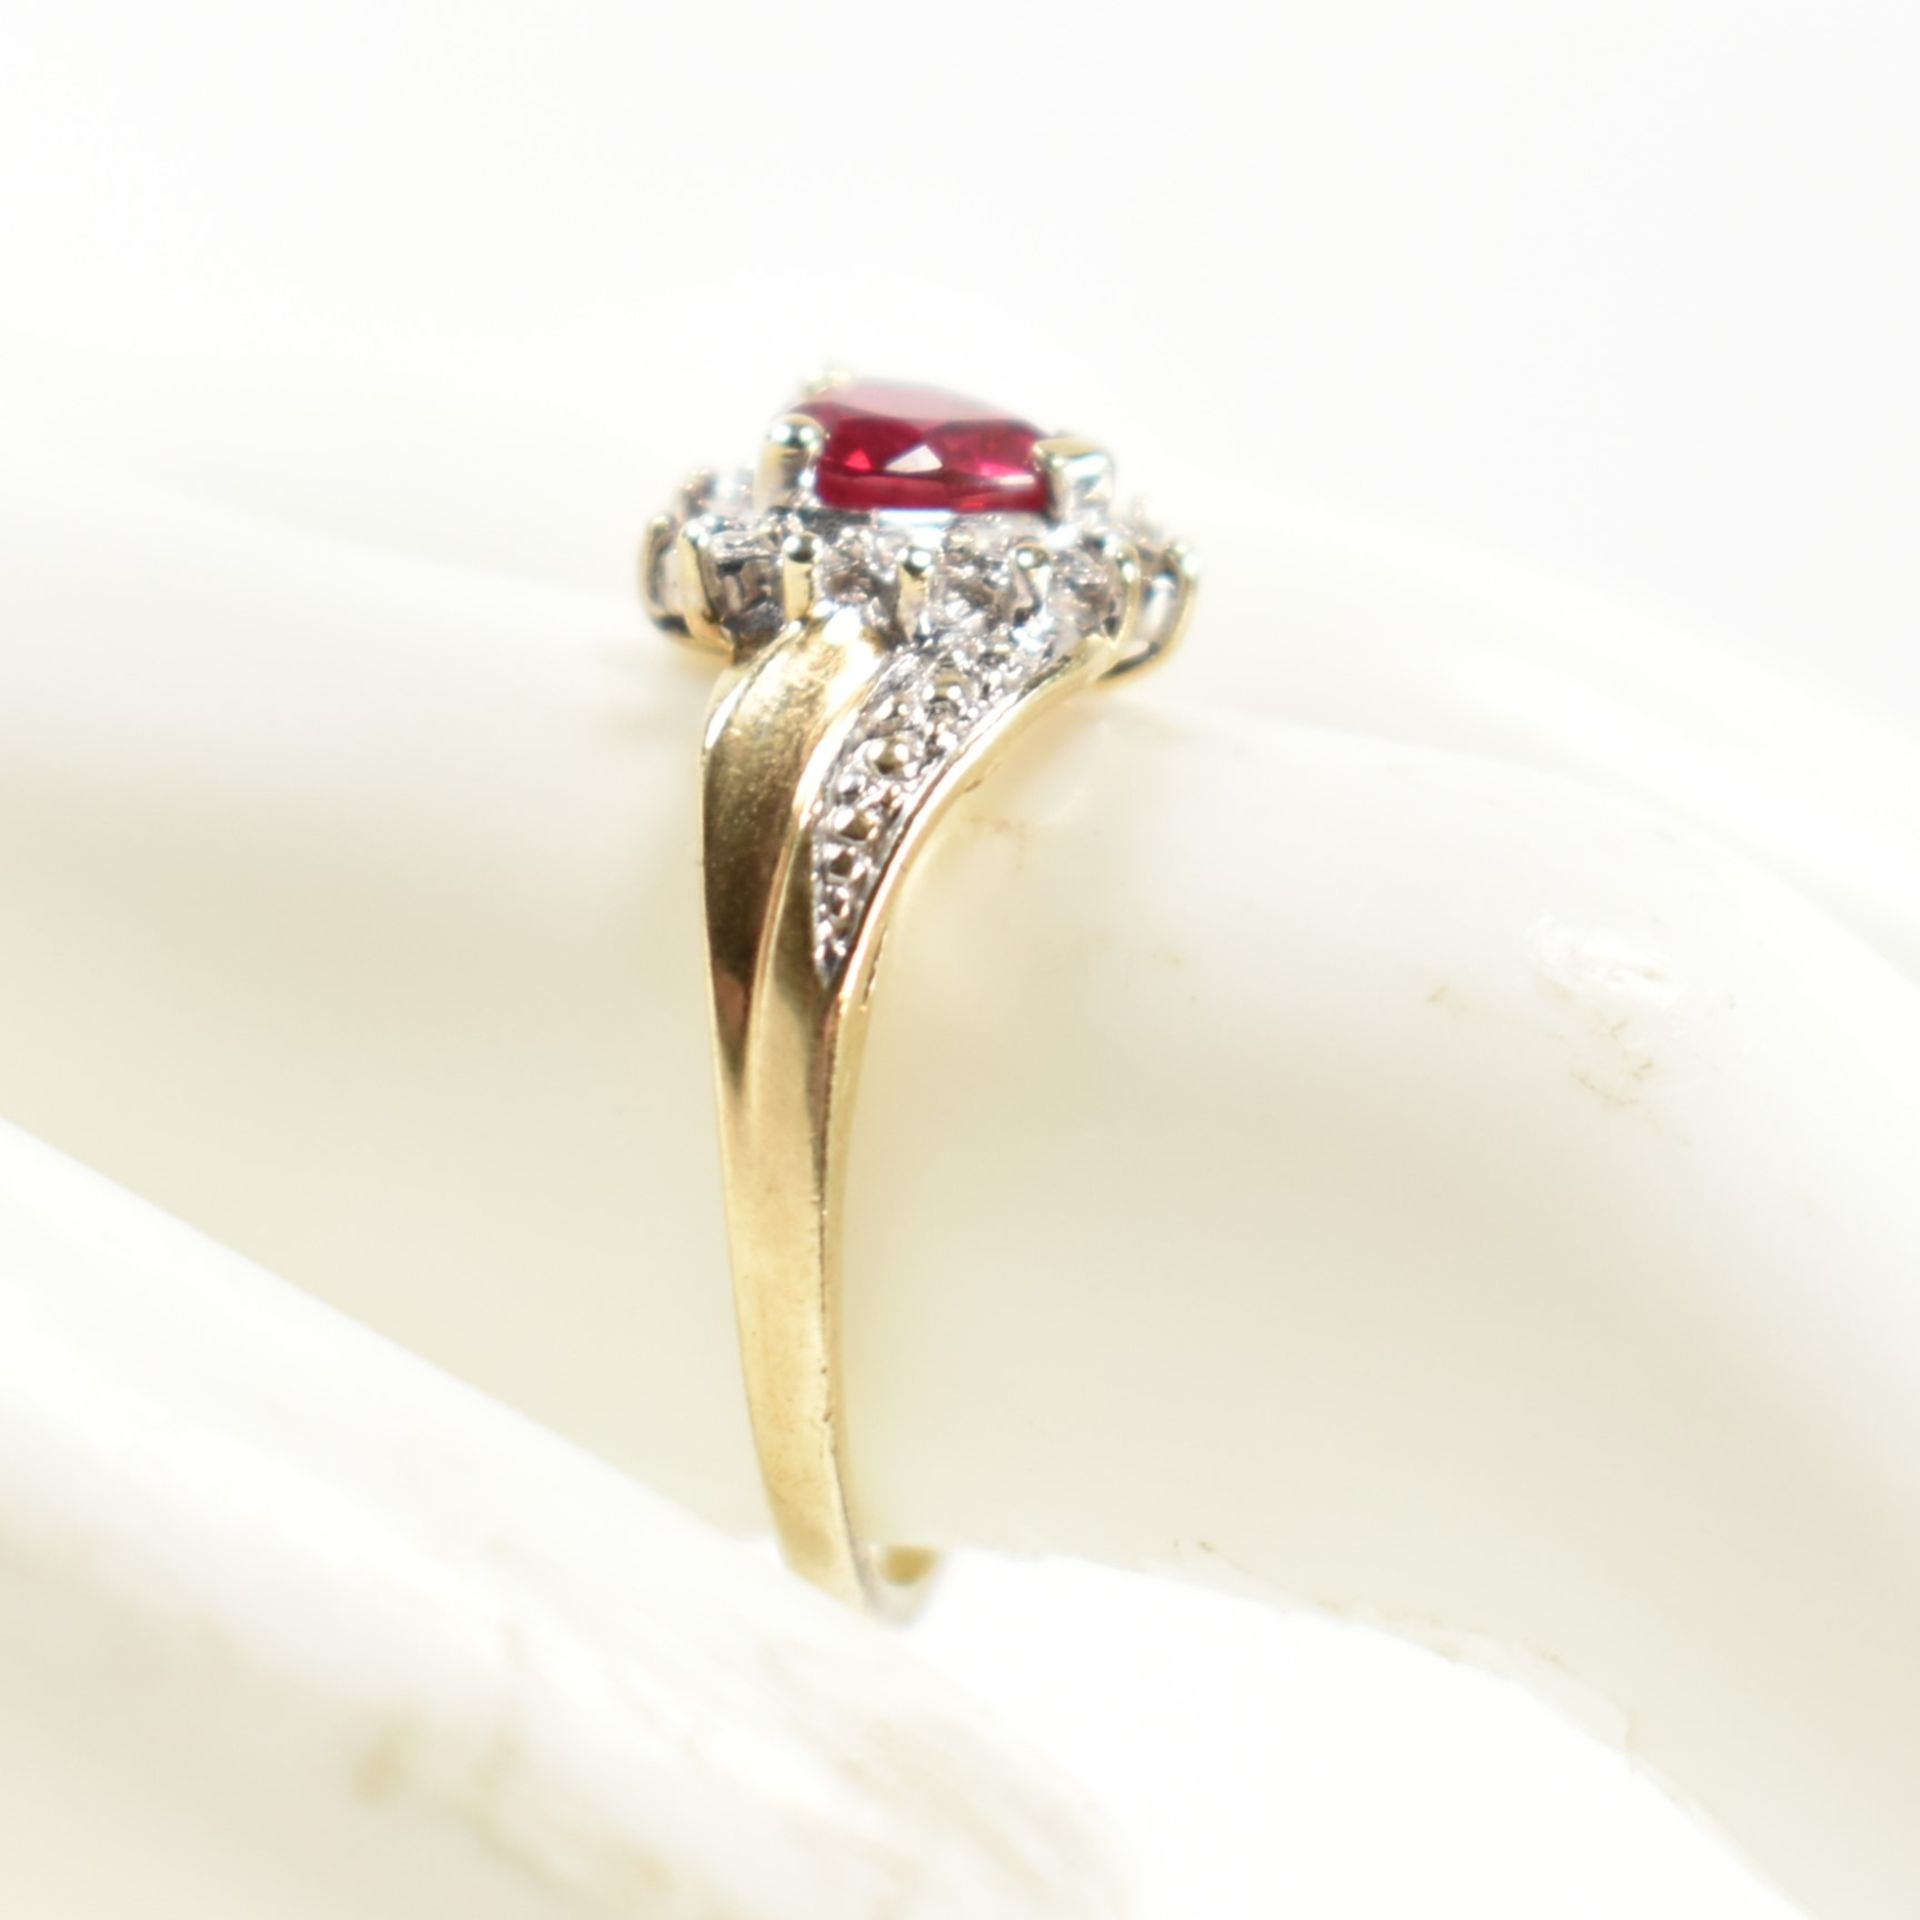 HALLMARKED 9CT GOLD DIAMOND & RUBY CLUSTER RING - Image 10 of 10